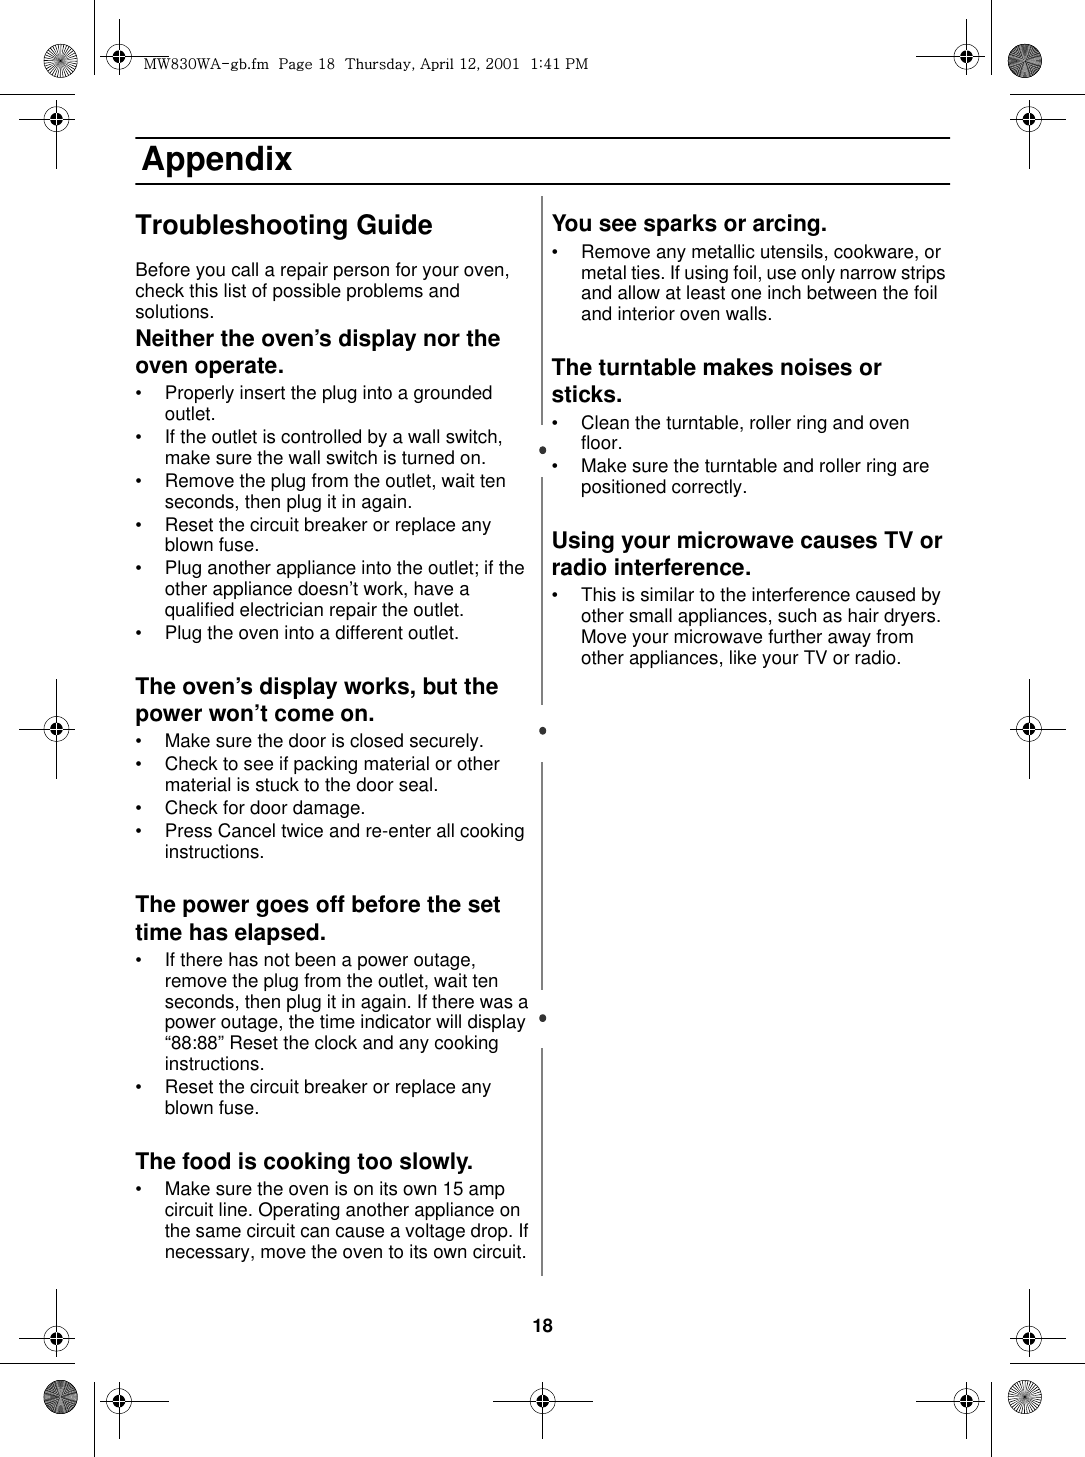 18 AppendixTroubleshooting GuideBefore you call a repair person for your oven, check this list of possible problems and solutions.Neither the oven’s display nor the oven operate.• Properly insert the plug into a grounded outlet. • If the outlet is controlled by a wall switch, make sure the wall switch is turned on. • Remove the plug from the outlet, wait ten seconds, then plug it in again. • Reset the circuit breaker or replace any blown fuse.• Plug another appliance into the outlet; if the other appliance doesn’t work, have a qualified electrician repair the outlet. • Plug the oven into a different outlet.The oven’s display works, but the power won’t come on.• Make sure the door is closed securely.• Check to see if packing material or other material is stuck to the door seal. • Check for door damage.• Press Cancel twice and re-enter all cooking instructions.The power goes off before the set time has elapsed.• If there has not been a power outage, remove the plug from the outlet, wait ten seconds, then plug it in again. If there was a power outage, the time indicator will display “88:88” Reset the clock and any cooking instructions. • Reset the circuit breaker or replace any blown fuse. The food is cooking too slowly.• Make sure the oven is on its own 15 amp circuit line. Operating another appliance on the same circuit can cause a voltage drop. If necessary, move the oven to its own circuit.You see sparks or arcing.• Remove any metallic utensils, cookware, or metal ties. If using foil, use only narrow strips and allow at least one inch between the foil and interior oven walls.The turntable makes noises or sticks.• Clean the turntable, roller ring and oven floor. • Make sure the turntable and roller ring are positioned correctly.Using your microwave causes TV or radio interference.• This is similar to the interference caused by other small appliances, such as hair dryers. Move your microwave further away from other appliances, like your TV or radio.t~_ZW~hTUGGwGX_GG{SGhGXYSGYWWXGGXa[XGwt